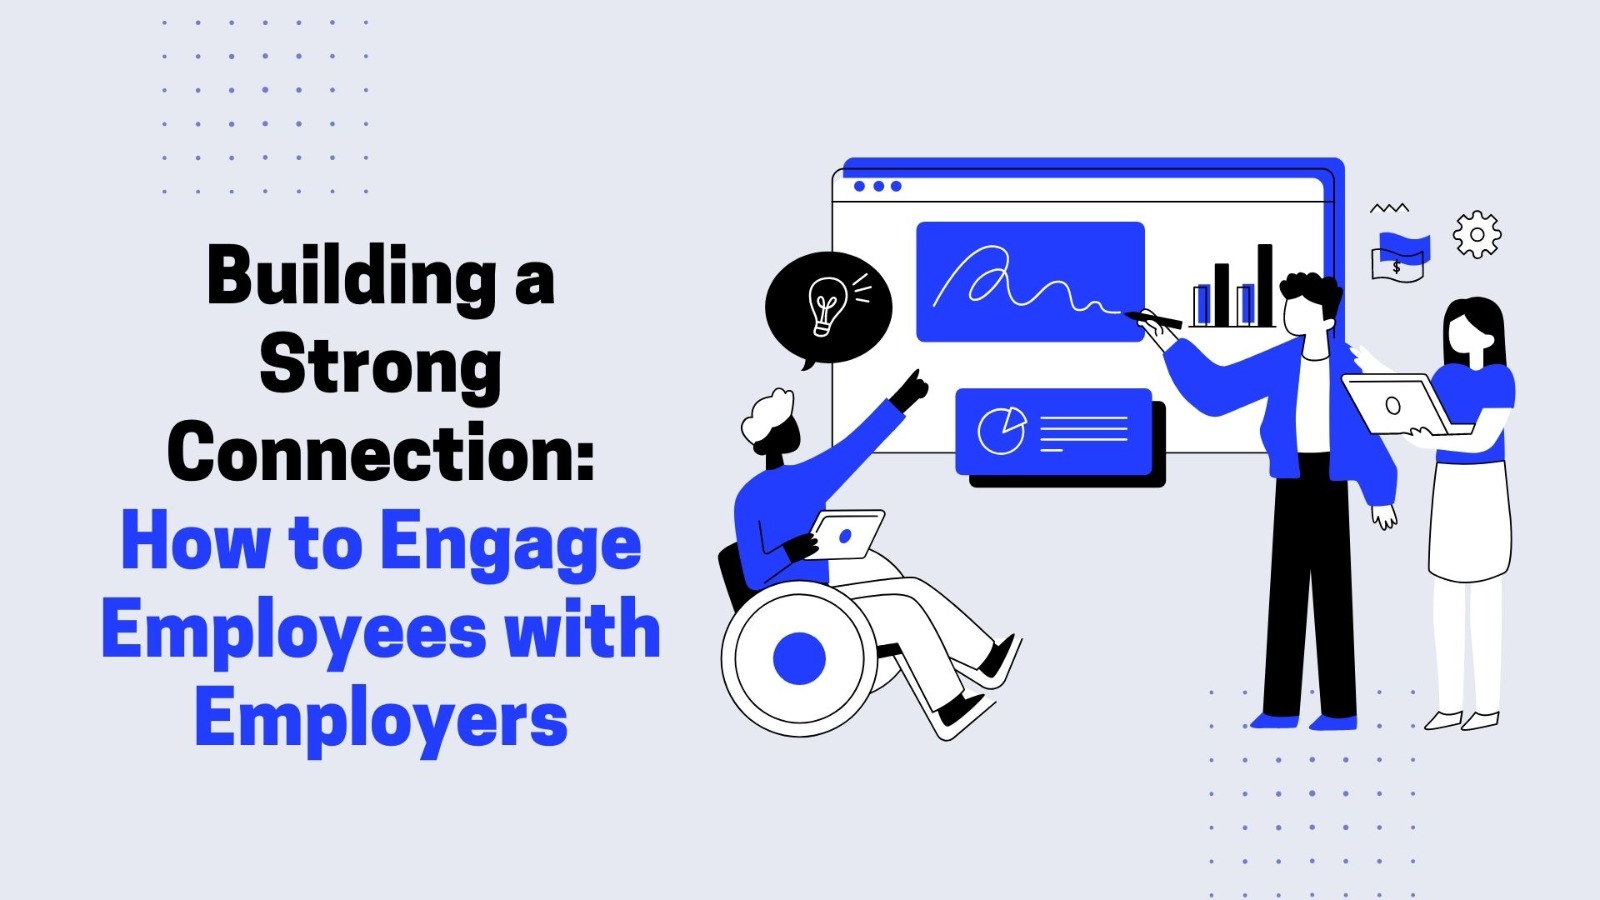 Building a Strong Connection: How to Engage Employees with Employers